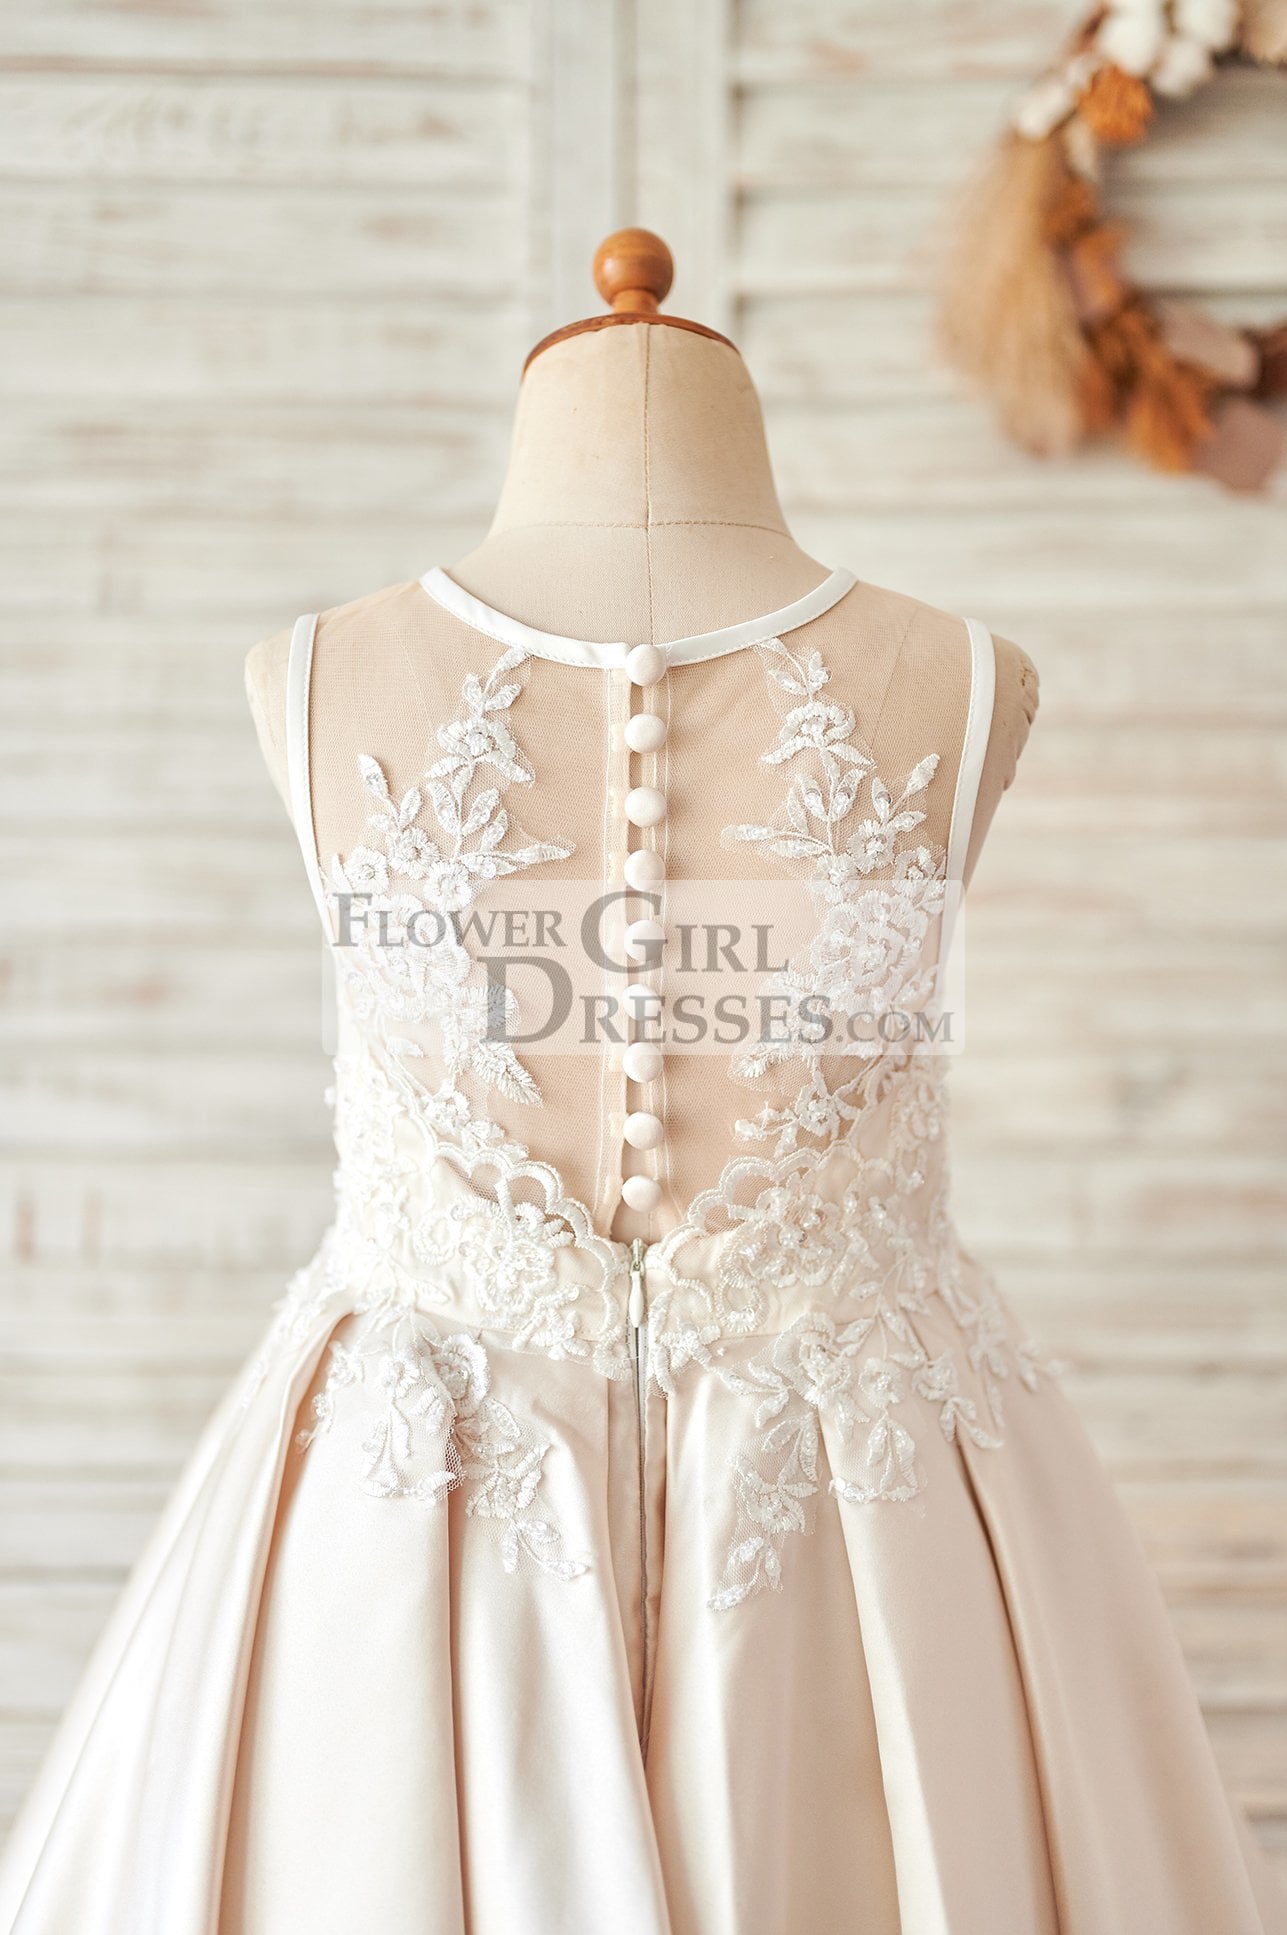 Phenas Girl Sleeveless Embroidery Princess Pageant Dresses Kids Ruffles  Lace Party Wedding Dress Prom Ball Gown - Walmart.com